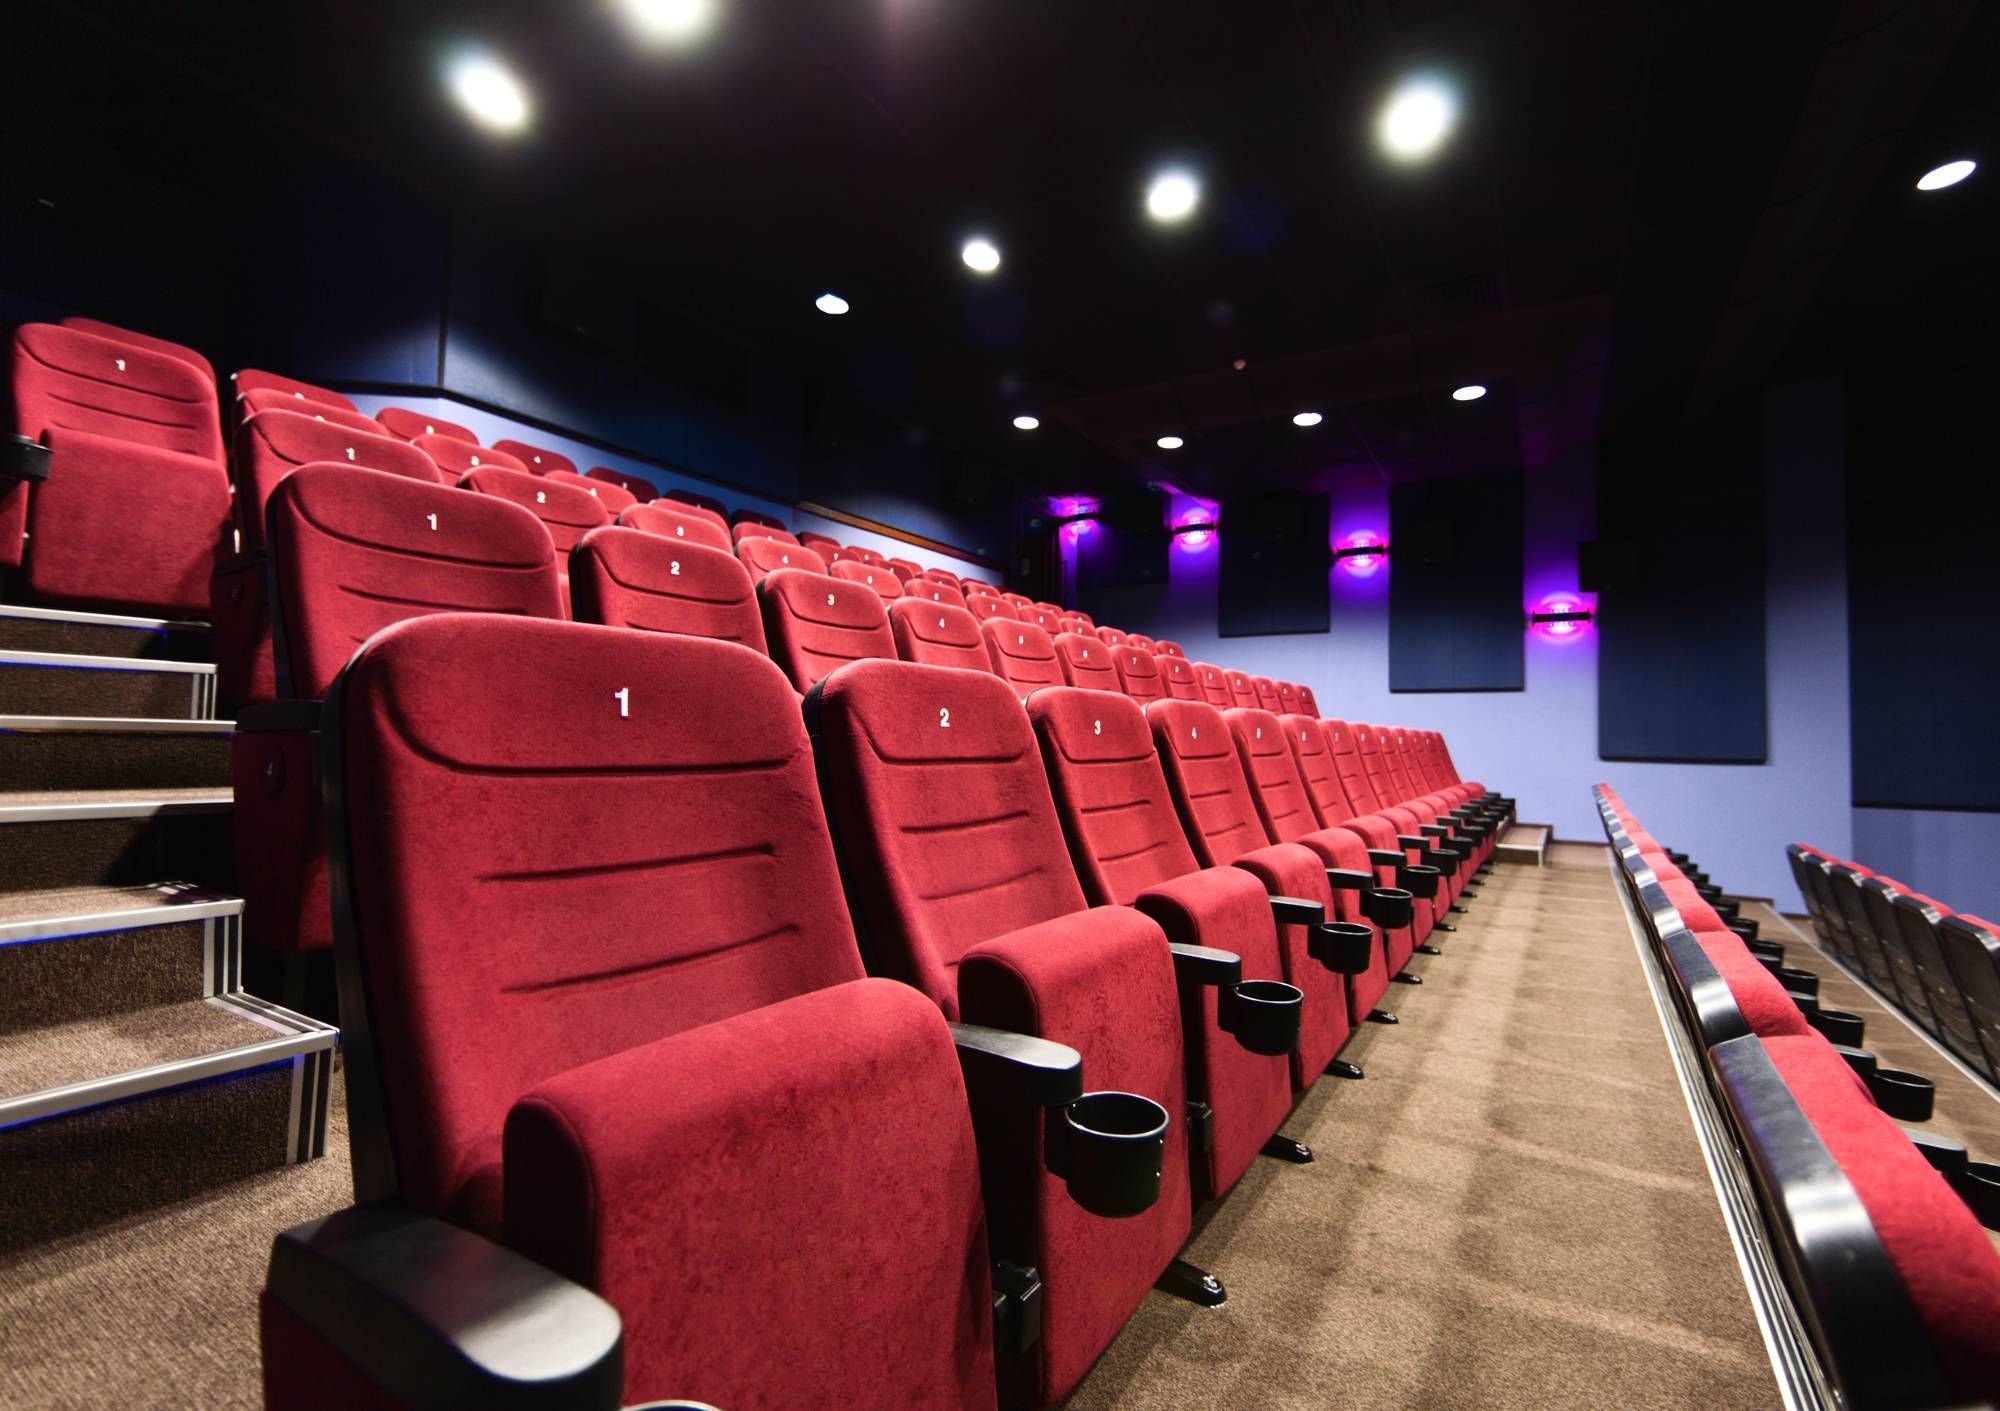 Movie theater shutdowns are unconstitutional, according to a recent AMC class action lawsuit.